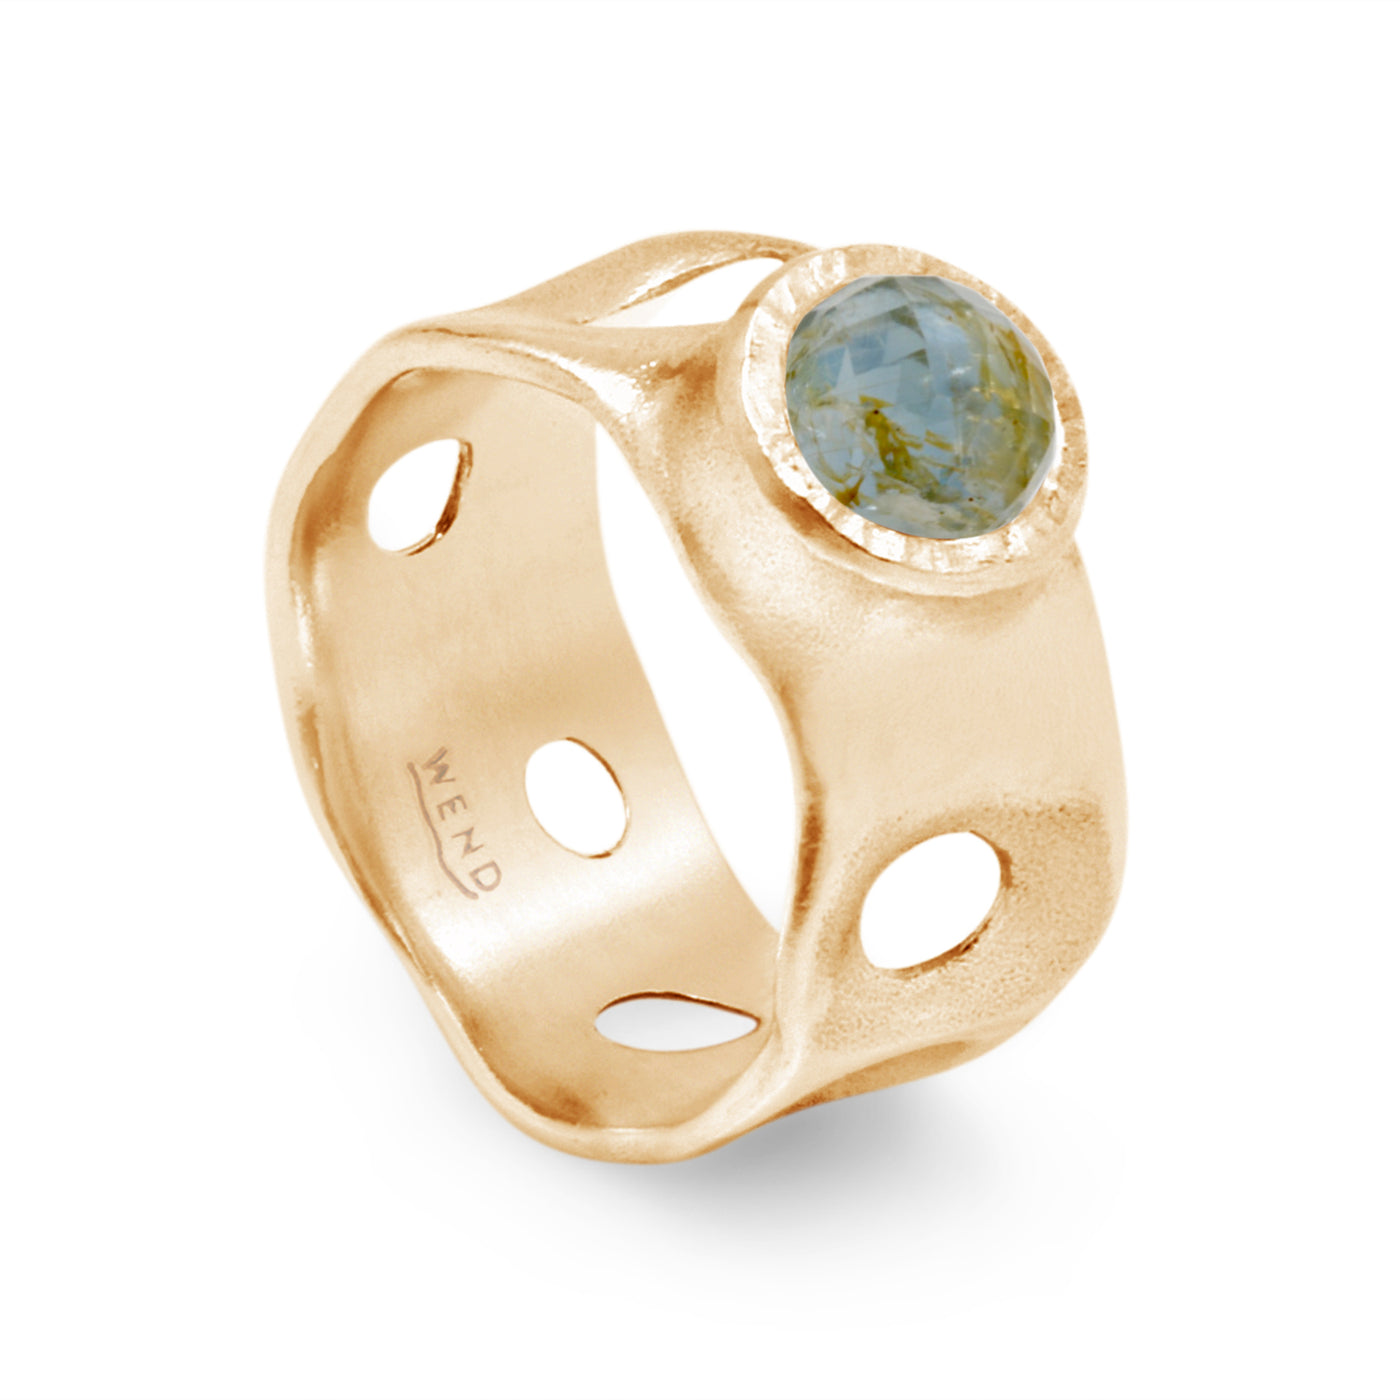 Tidepools rings inspired by ocean tide pools with Montana Sapphire in certified recycled gold by WEND Jewelry #gemstone-size_6-5mm